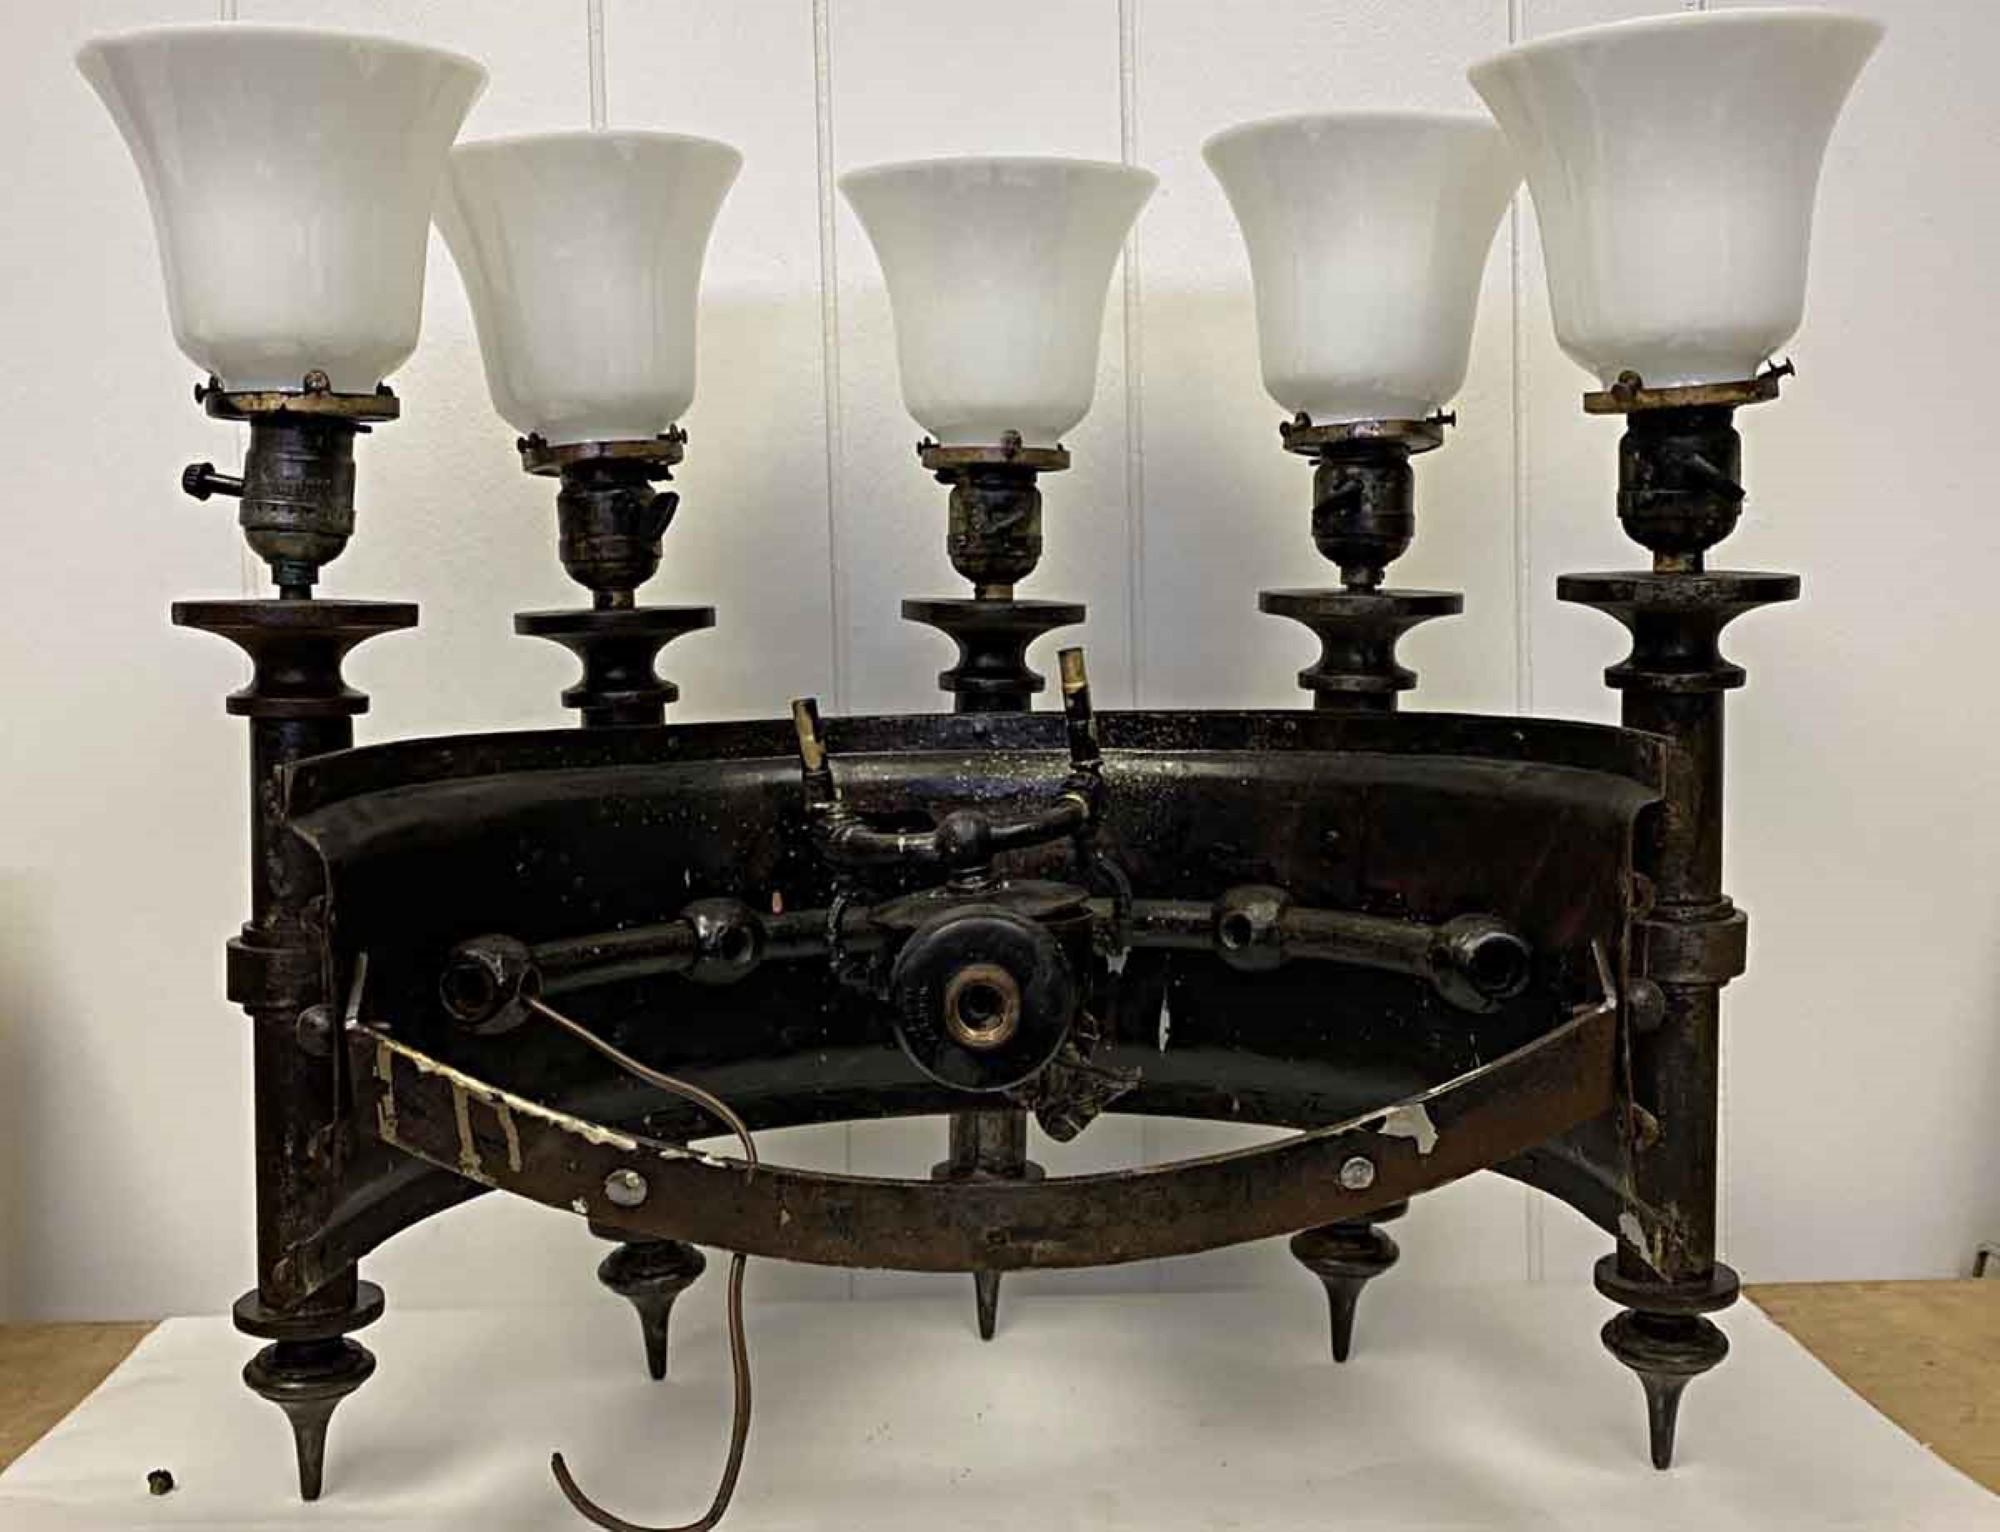 Gothic Cast Iron Castle Sconce 5 Torch Lights Quantity Available 3